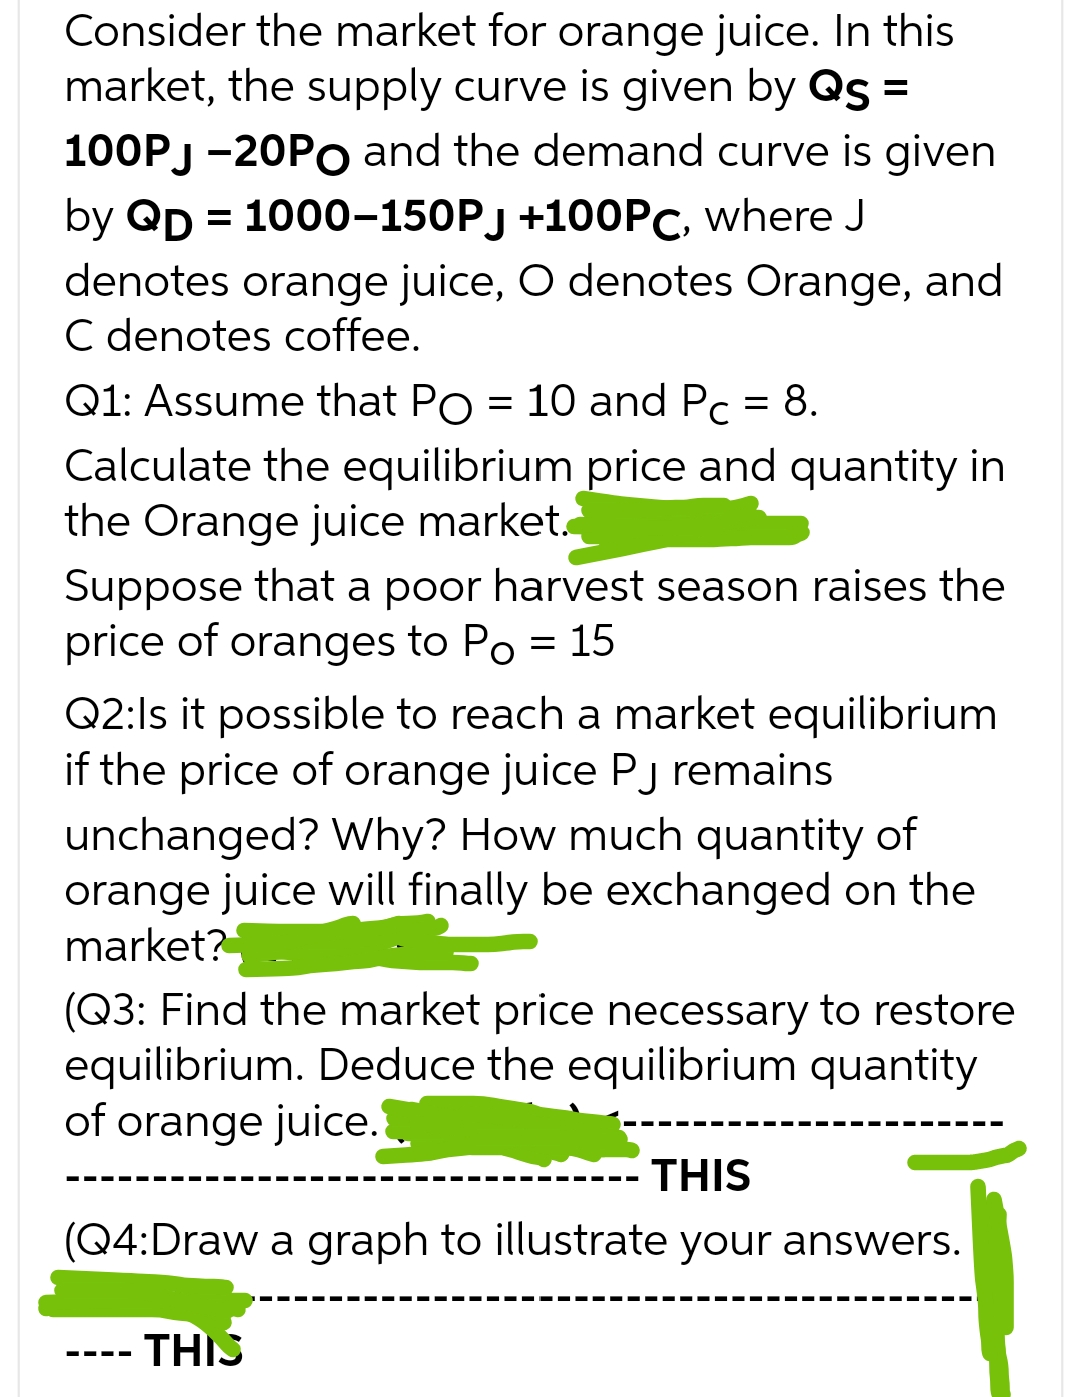 Consider the market for orange juice. In this
market, the supply curve is given by Qs =
100PJ-20PO and the demand curve is given
by QD = 1000-150PJ +100PC, where J
denotes orange juice, O denotes Orange, and
C denotes coffee.
Q1: Assume that Po = 10 and Pc = 8.
Calculate the equilibrium price and quantity in
the Orange juice market.
Suppose that a poor harvest season raises the
price of oranges to Po = 15
Q2:Is it possible to reach a market equilibrium
if the price of orange juice Pj remains
unchanged? Why? How much quantity of
orange juice will finally be exchanged on the
market?
(Q3: Find the market price necessary to restore
equilibrium. Deduce the equilibrium quantity
of orange juice.
THIS
(Q4:Draw a graph to illustrate your answers.
THIS